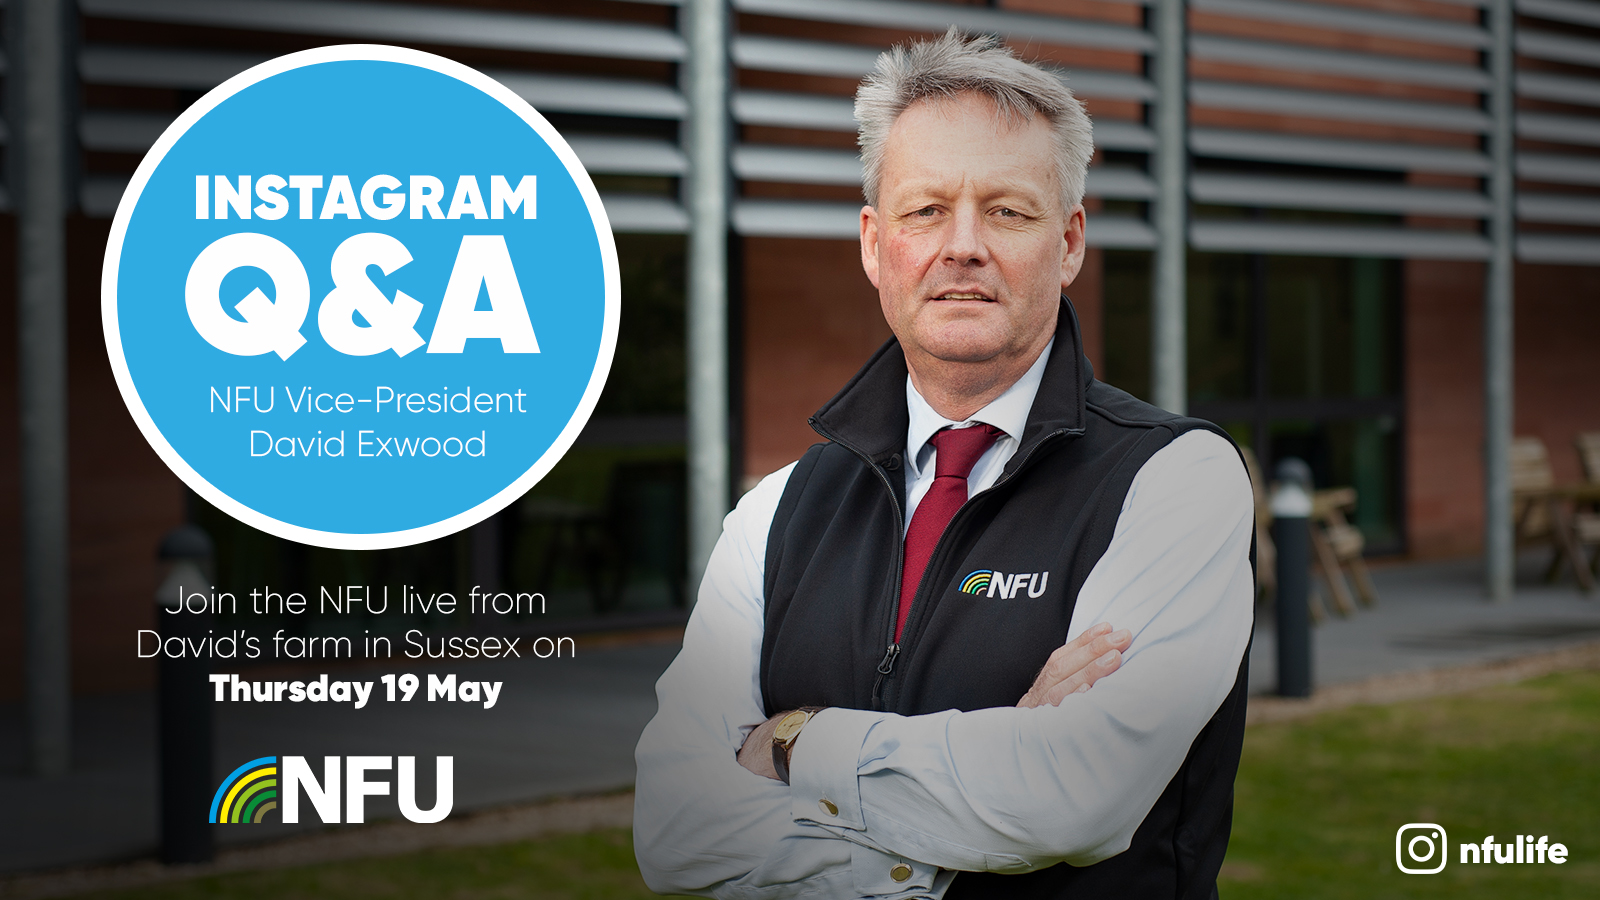 Instagram Q&A with David Exwood on 19 May